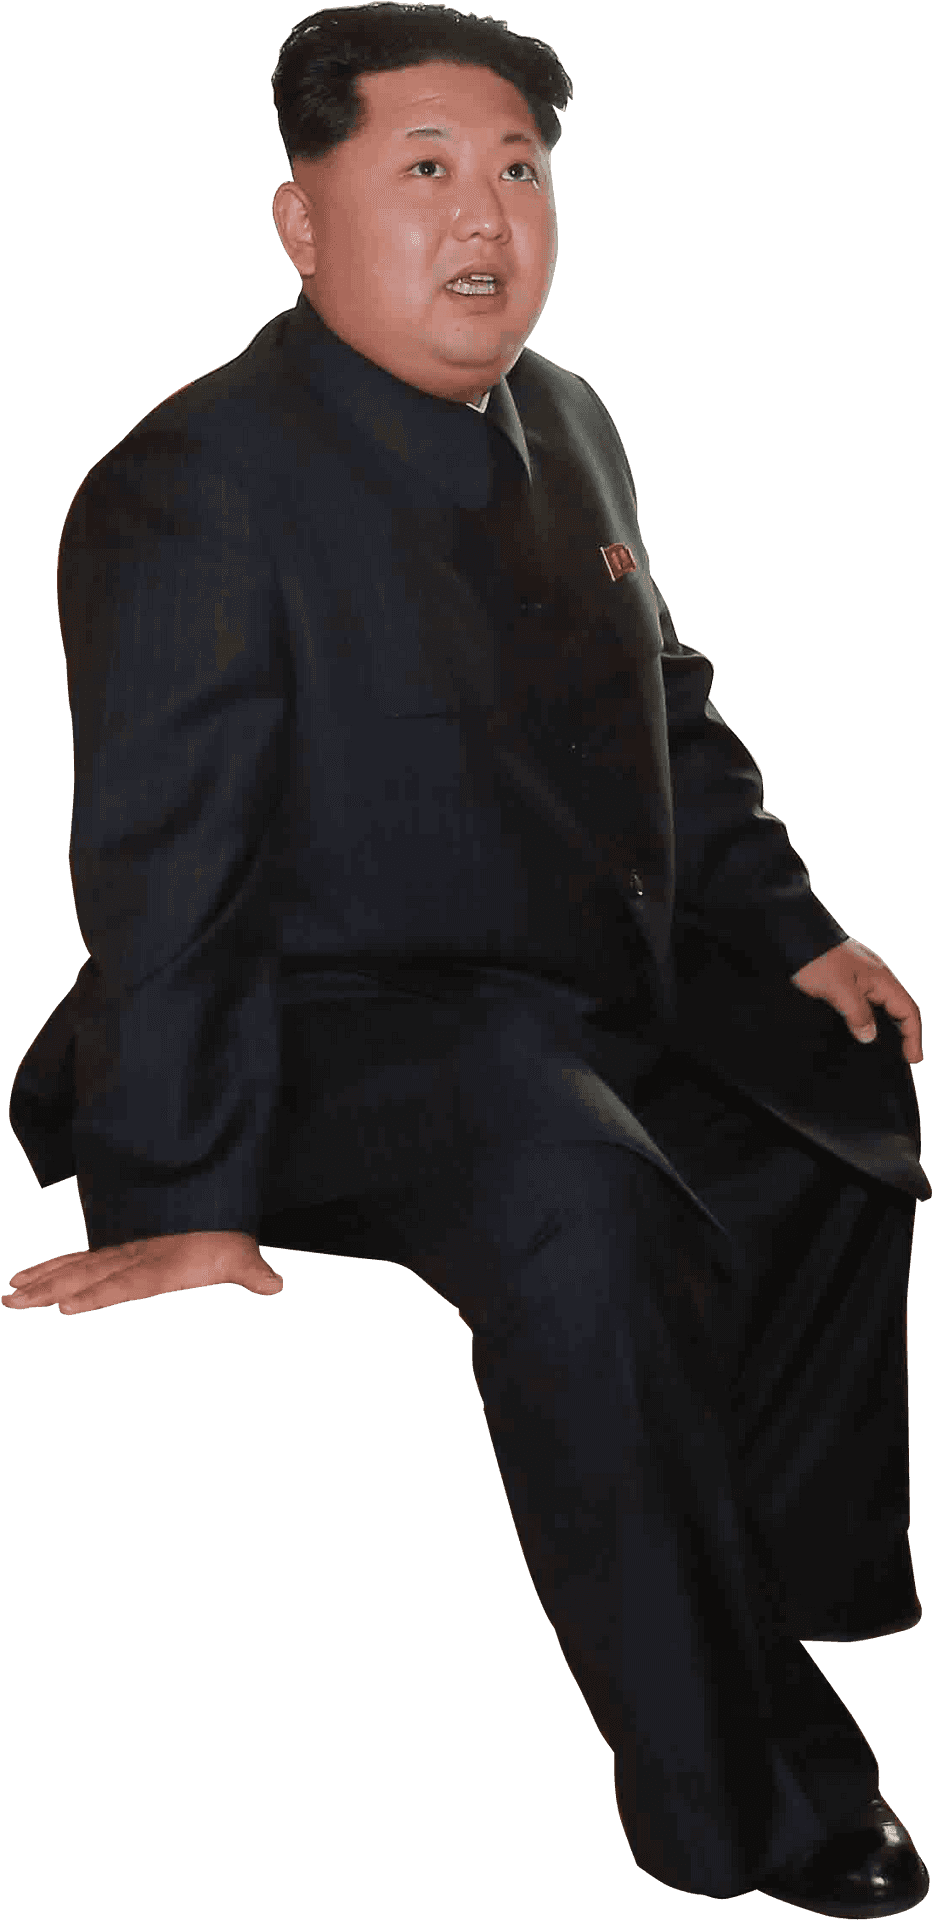 Manin Black Suit Seated Pose PNG